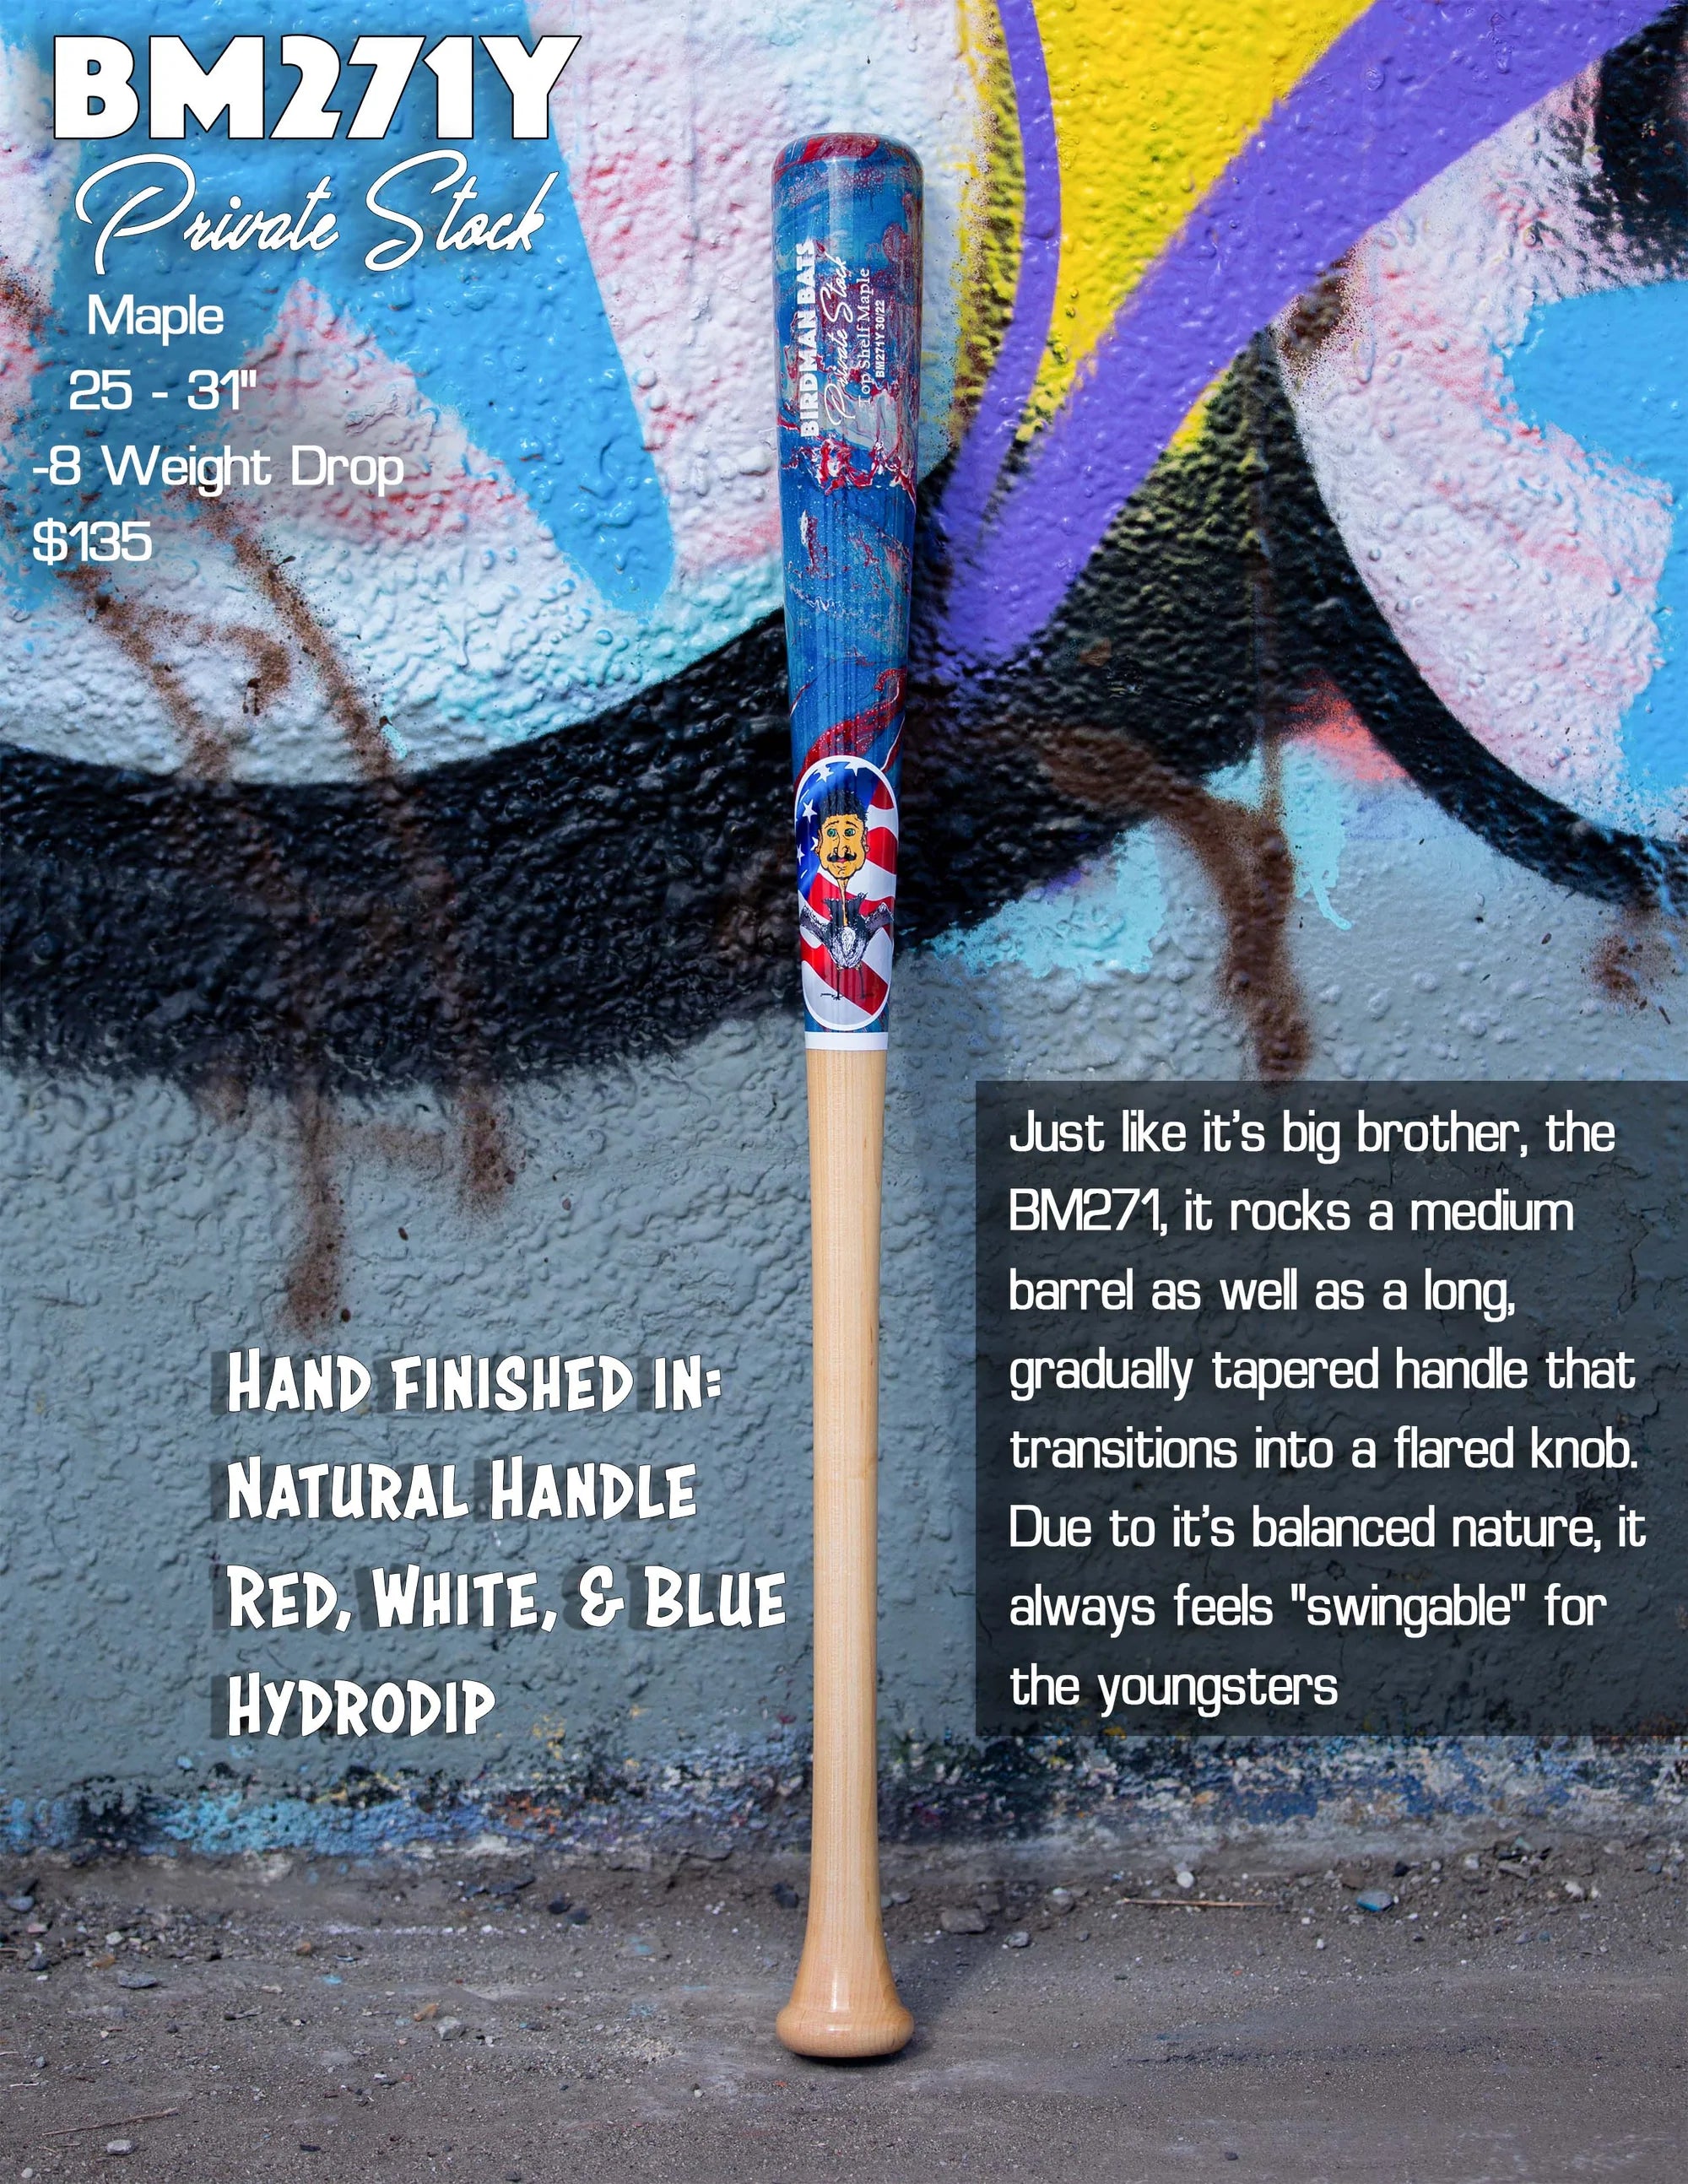 Red/White/Blue Hydro-Dipped Private Stock Baseball Bat - BM271Y - Pro Game Sports